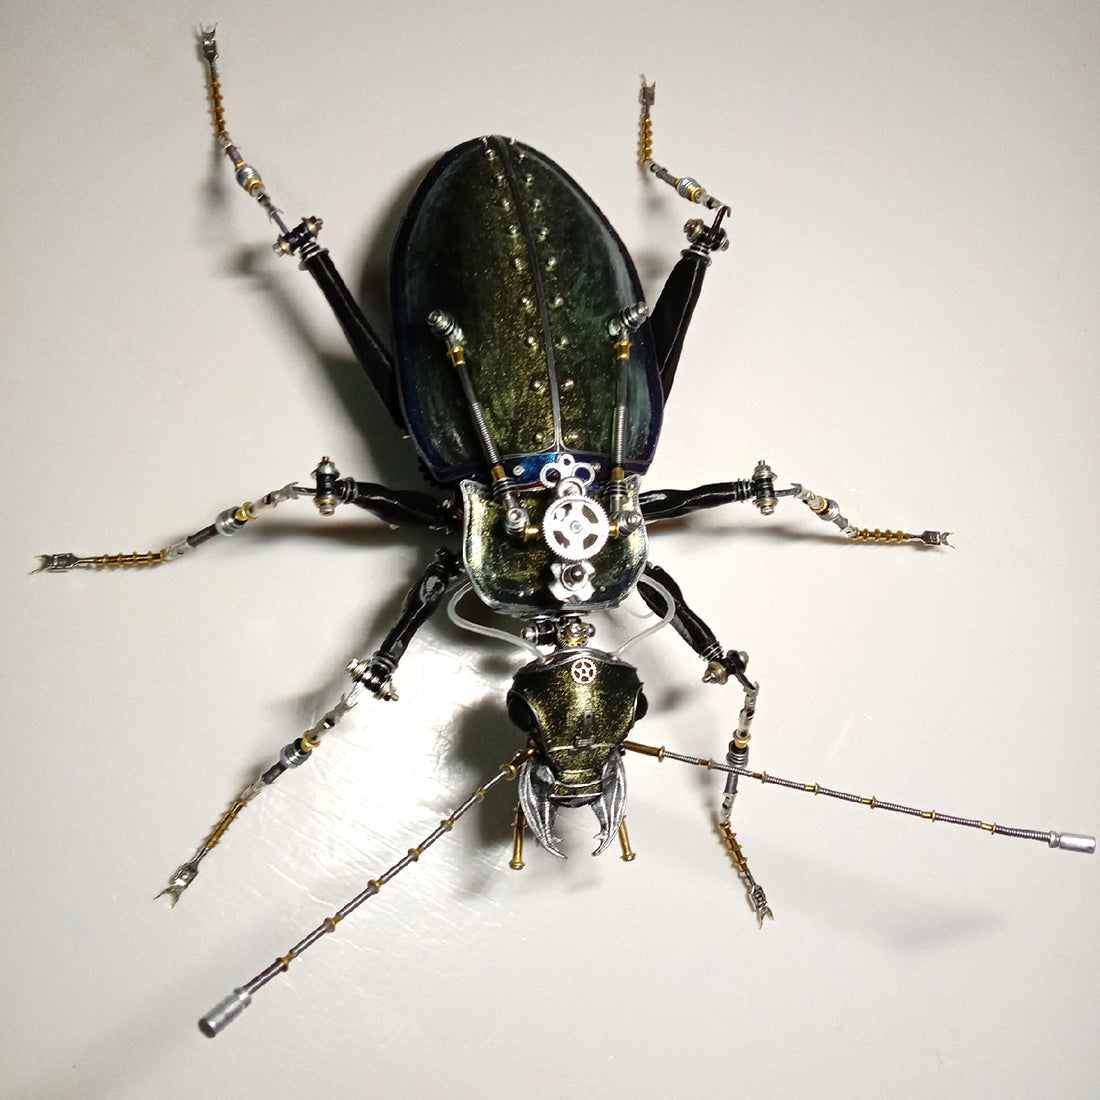 Steampunk Mechanical Metal Green Ground Beetle Insect Sculptures  Assembled